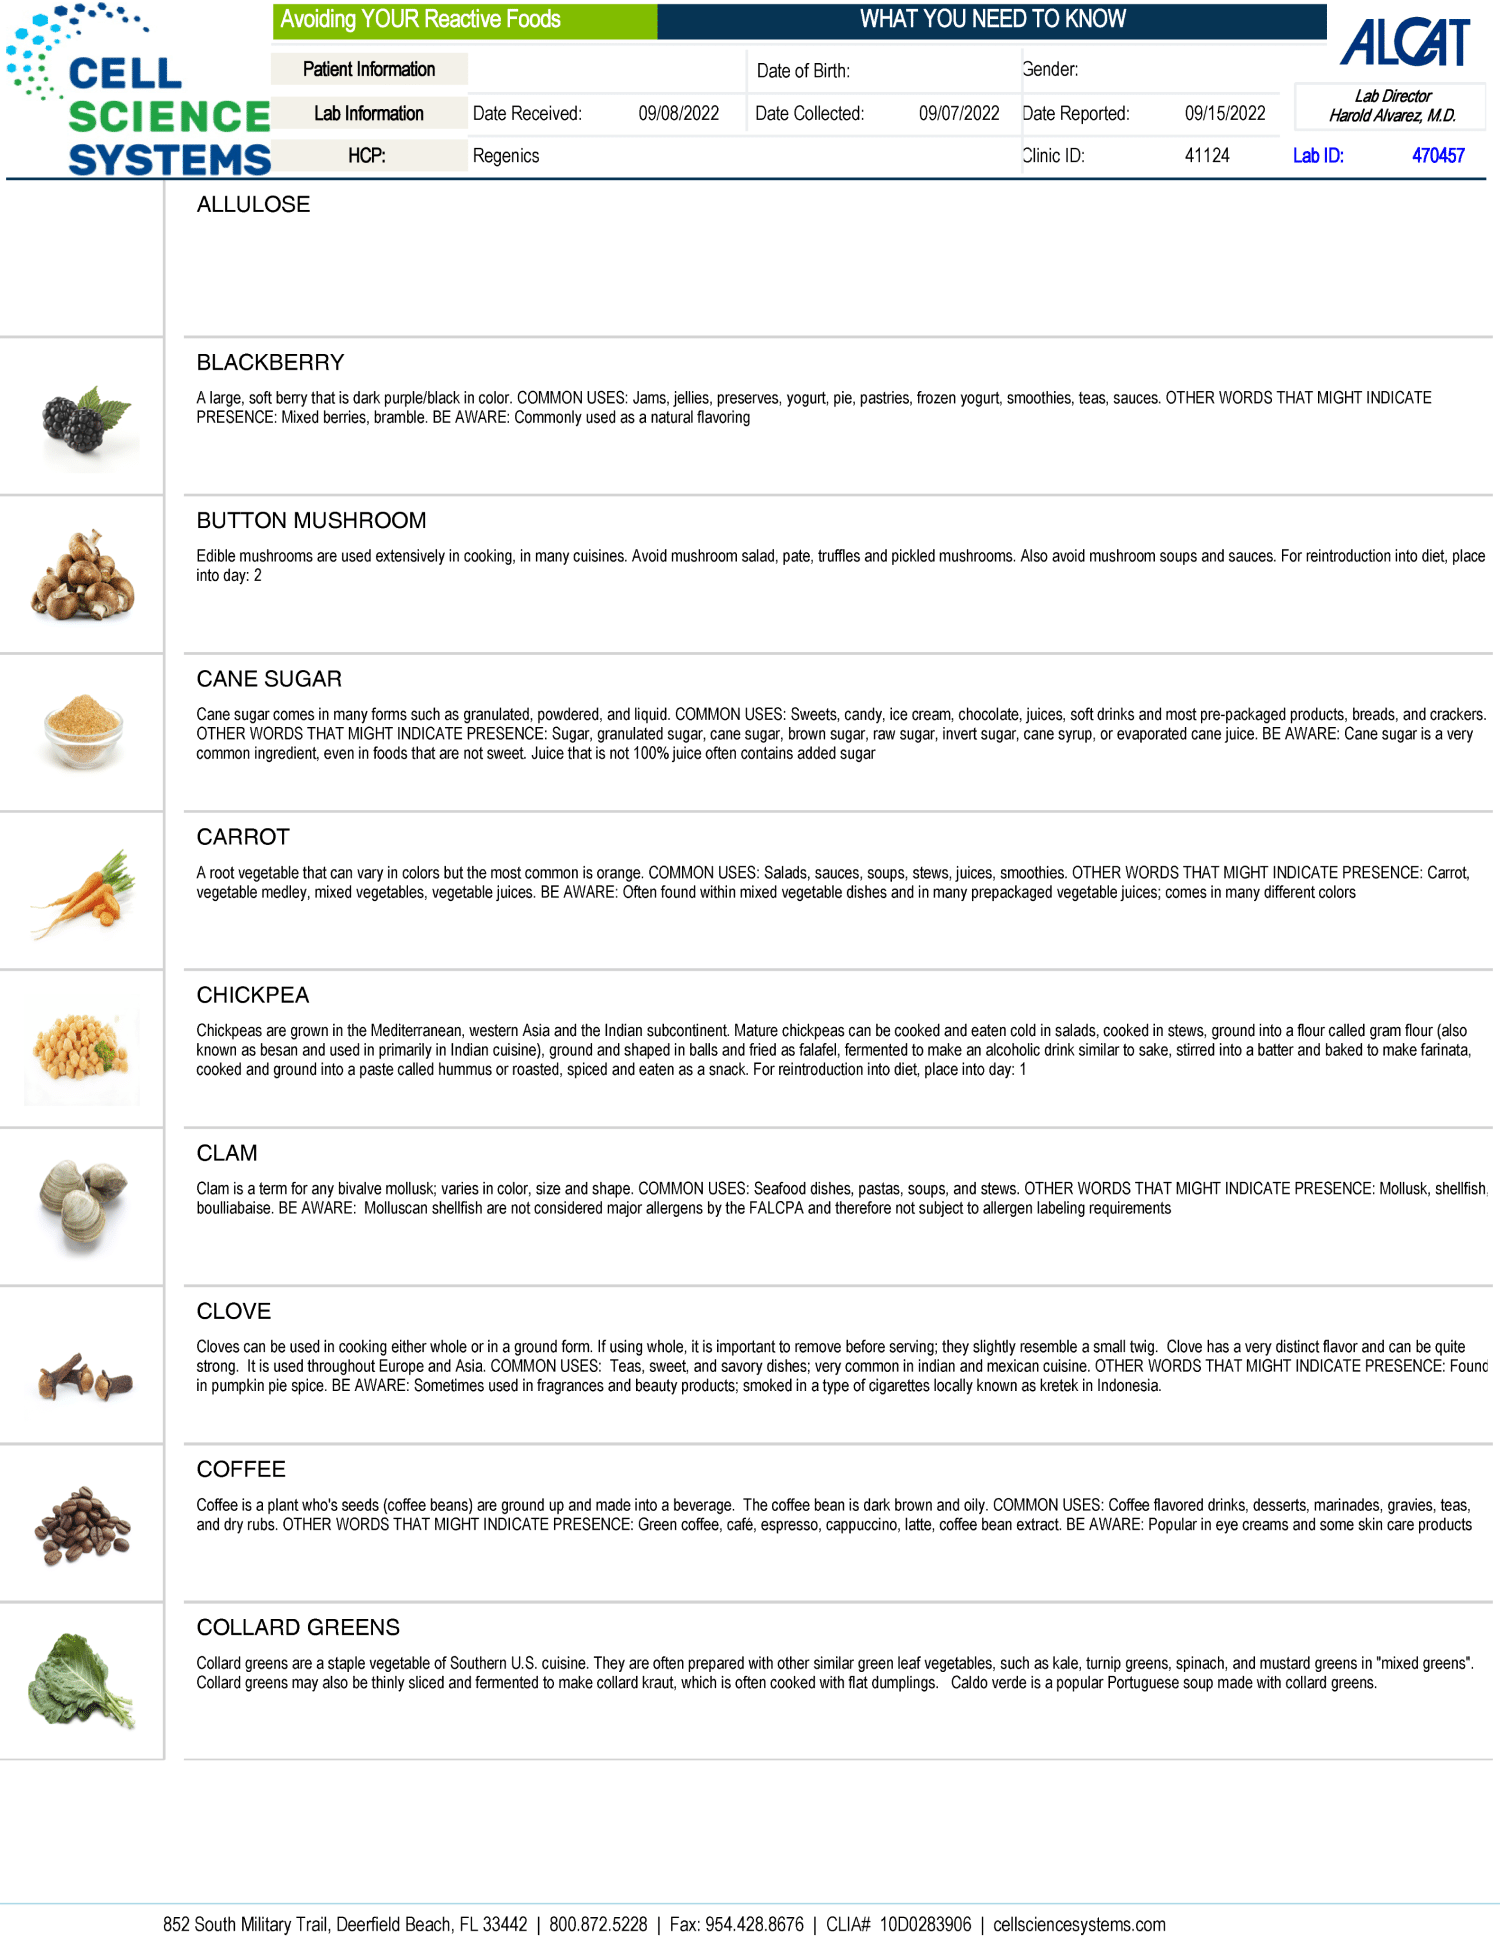 A screen shot of a page showing different types of foods for FOOD SENSITIVITY TESTING.